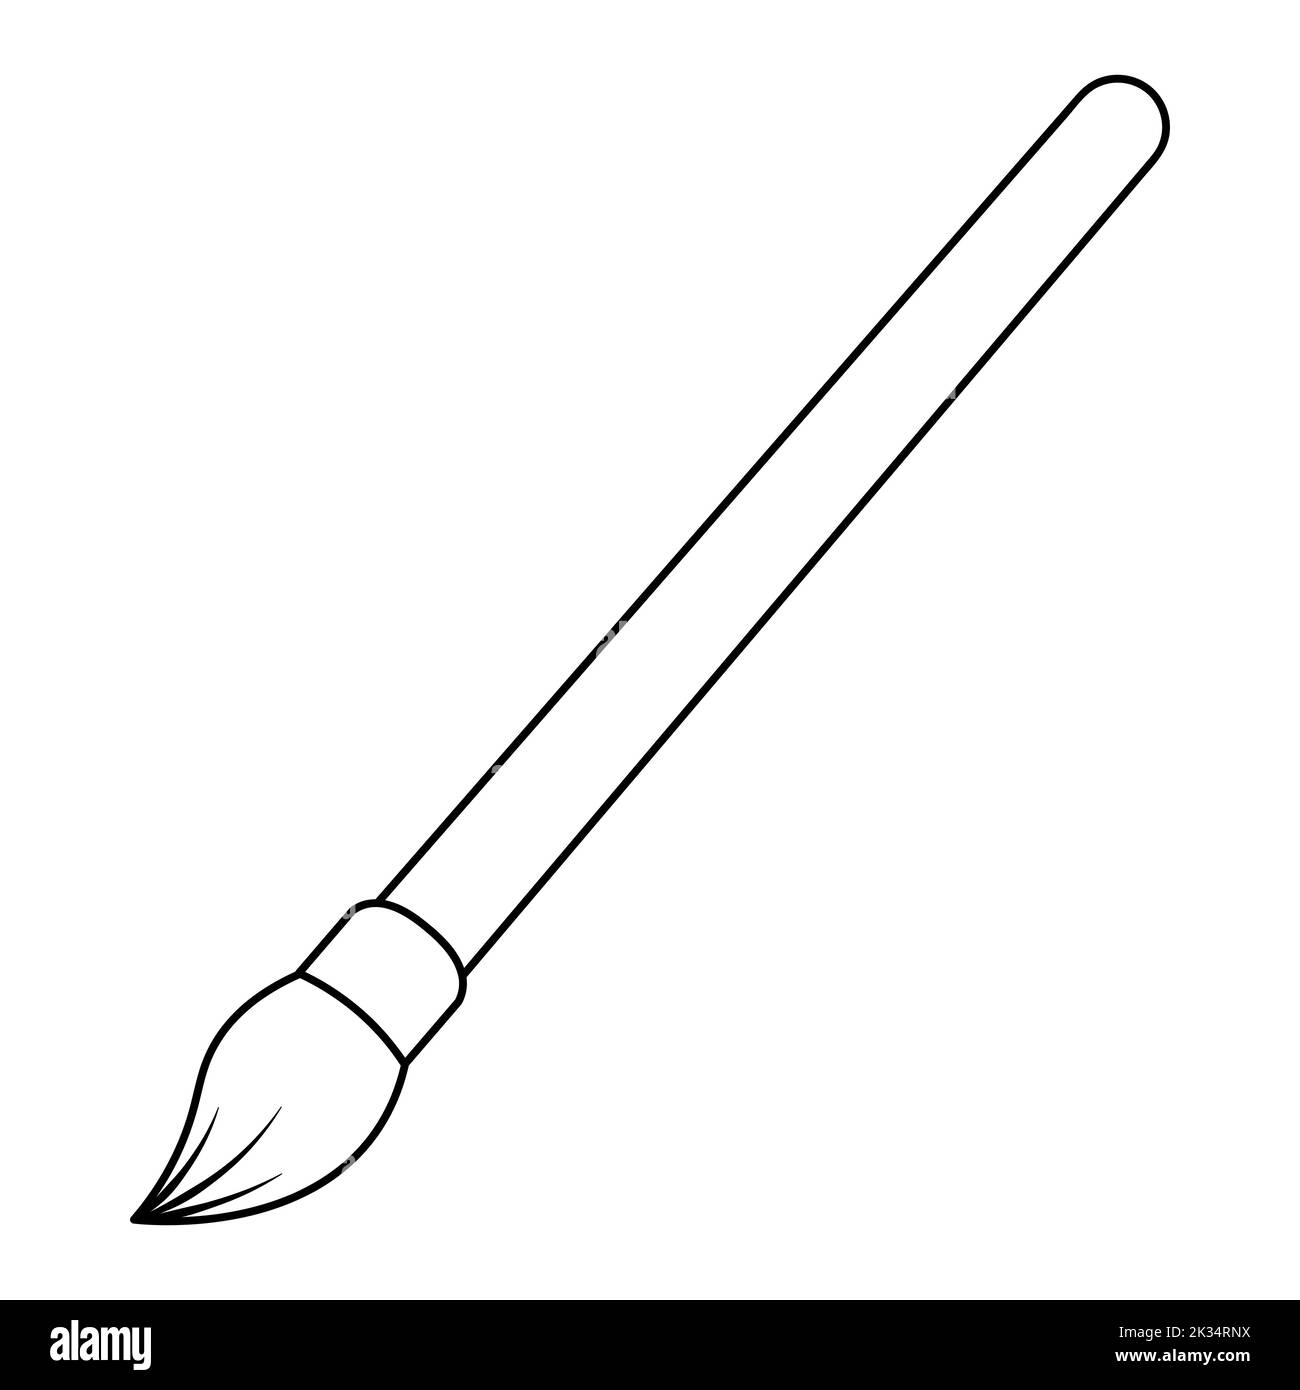 Paint brush. Sketch. Artistic tool for coloring. Vector illustration. Coloring book for children. Brush with hard bristles. Device for creativity. Stock Vector